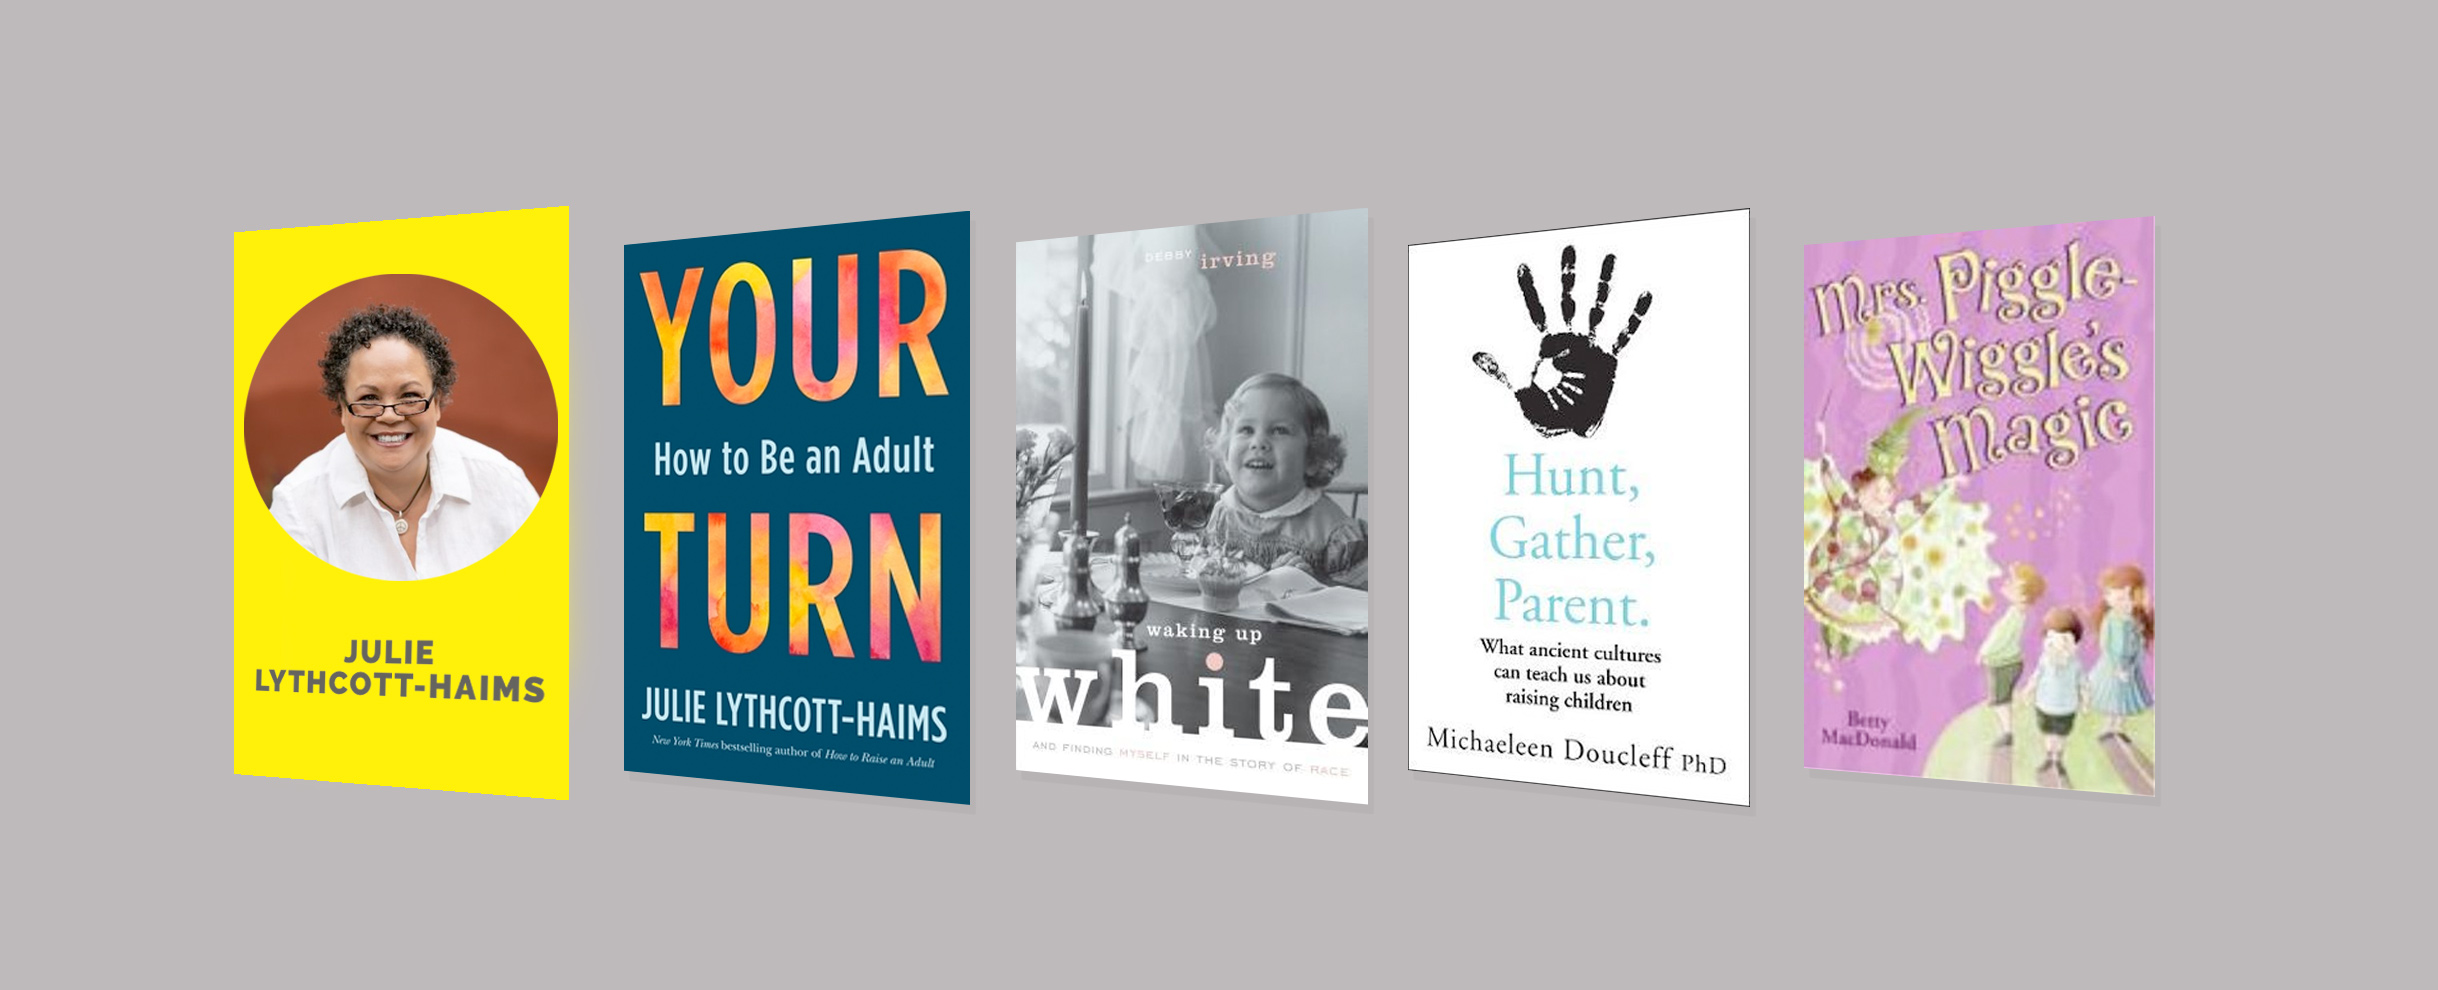 Interview with Julie Lythcott-Haims, author of Your Turn: How to Be an Adult